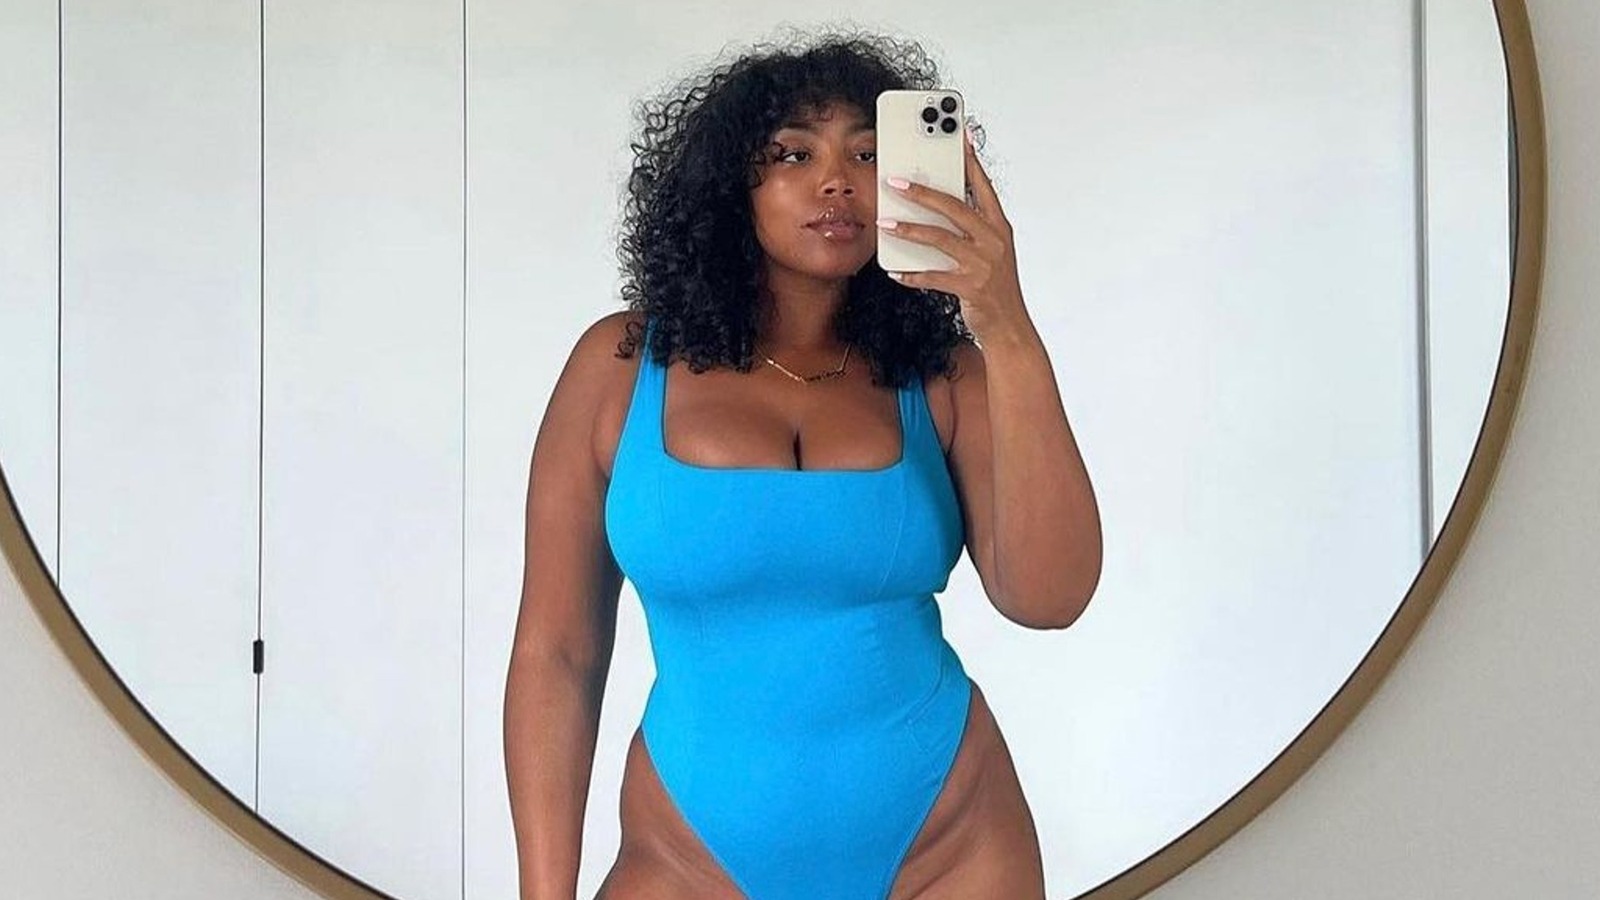 The @TA3 SWIM review you have been waiting for. This viral waist snatc